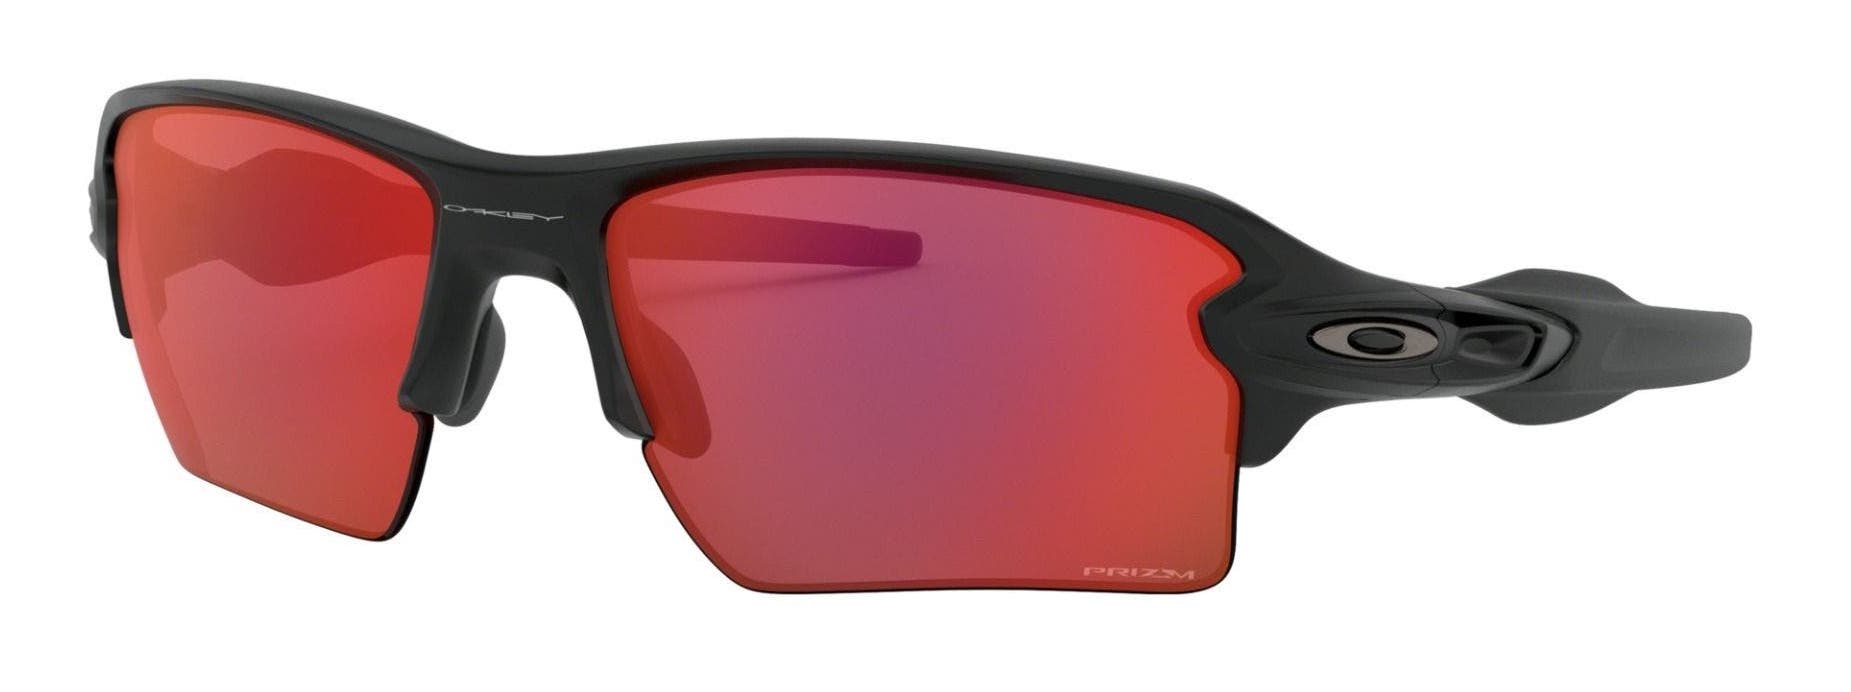 oakley flak 2.0 xl cycling sunglasses in matte black with prizm trail torch red lenses